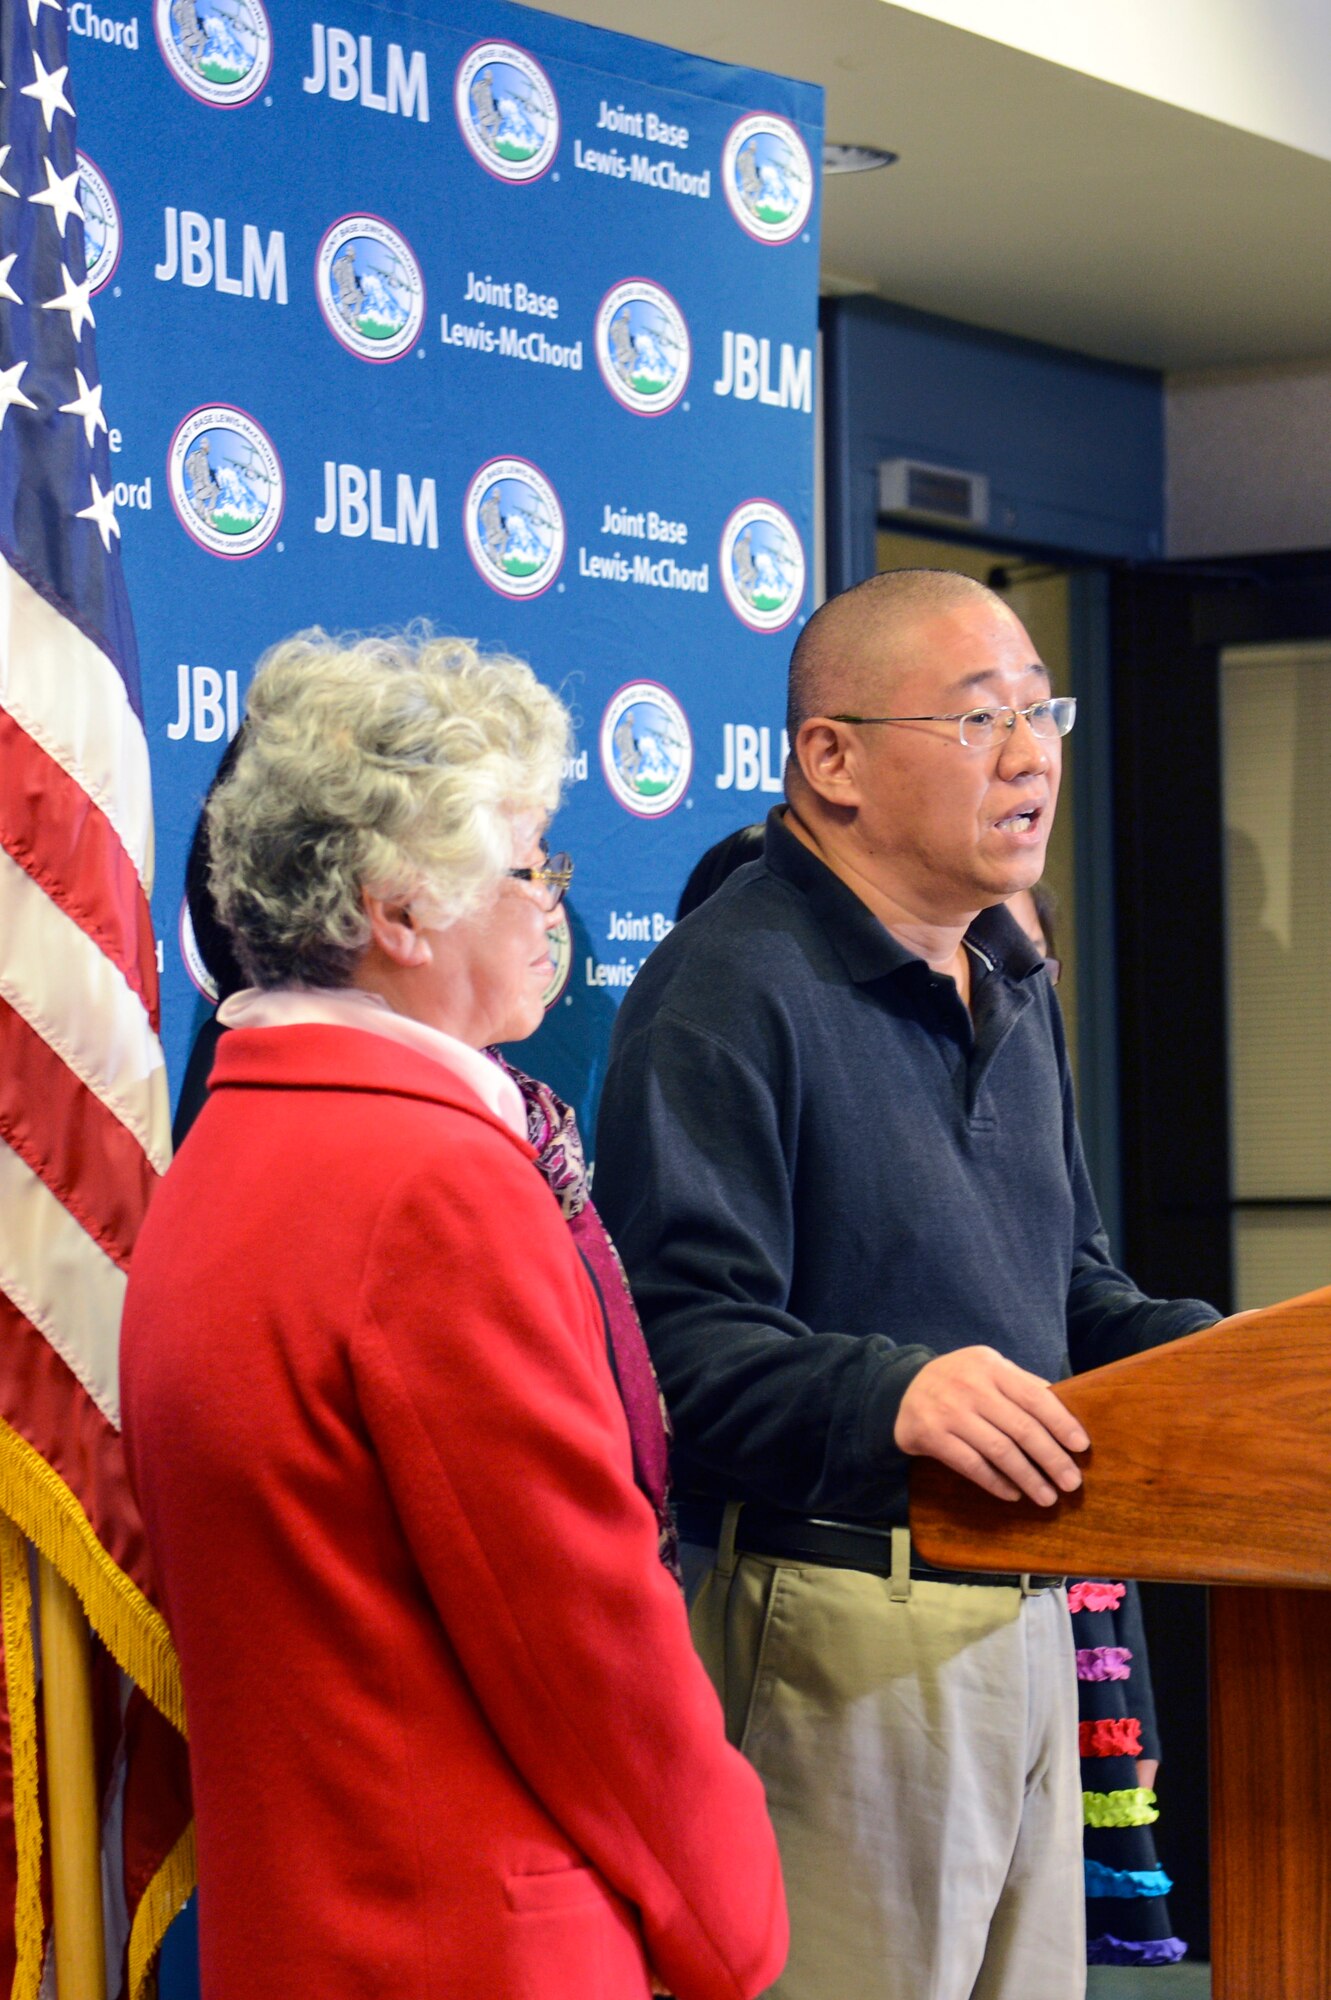 Kenneth Bae, one of the last two American citizens imprisoned in North Korea, addresses the media during a press conference and thanked President Obama, the State Department and the North Korean government for his release Nov. 8th, 2014, at Joint Base Lewis-McChord, Wash.  James Clapper, U.S. Director of National Intelligence went to Pyongyang, North Korea and secured the release of the two men after meeting with North Korean officials. (U.S. Air Force photo/Staff Sgt. Russ Jackson)